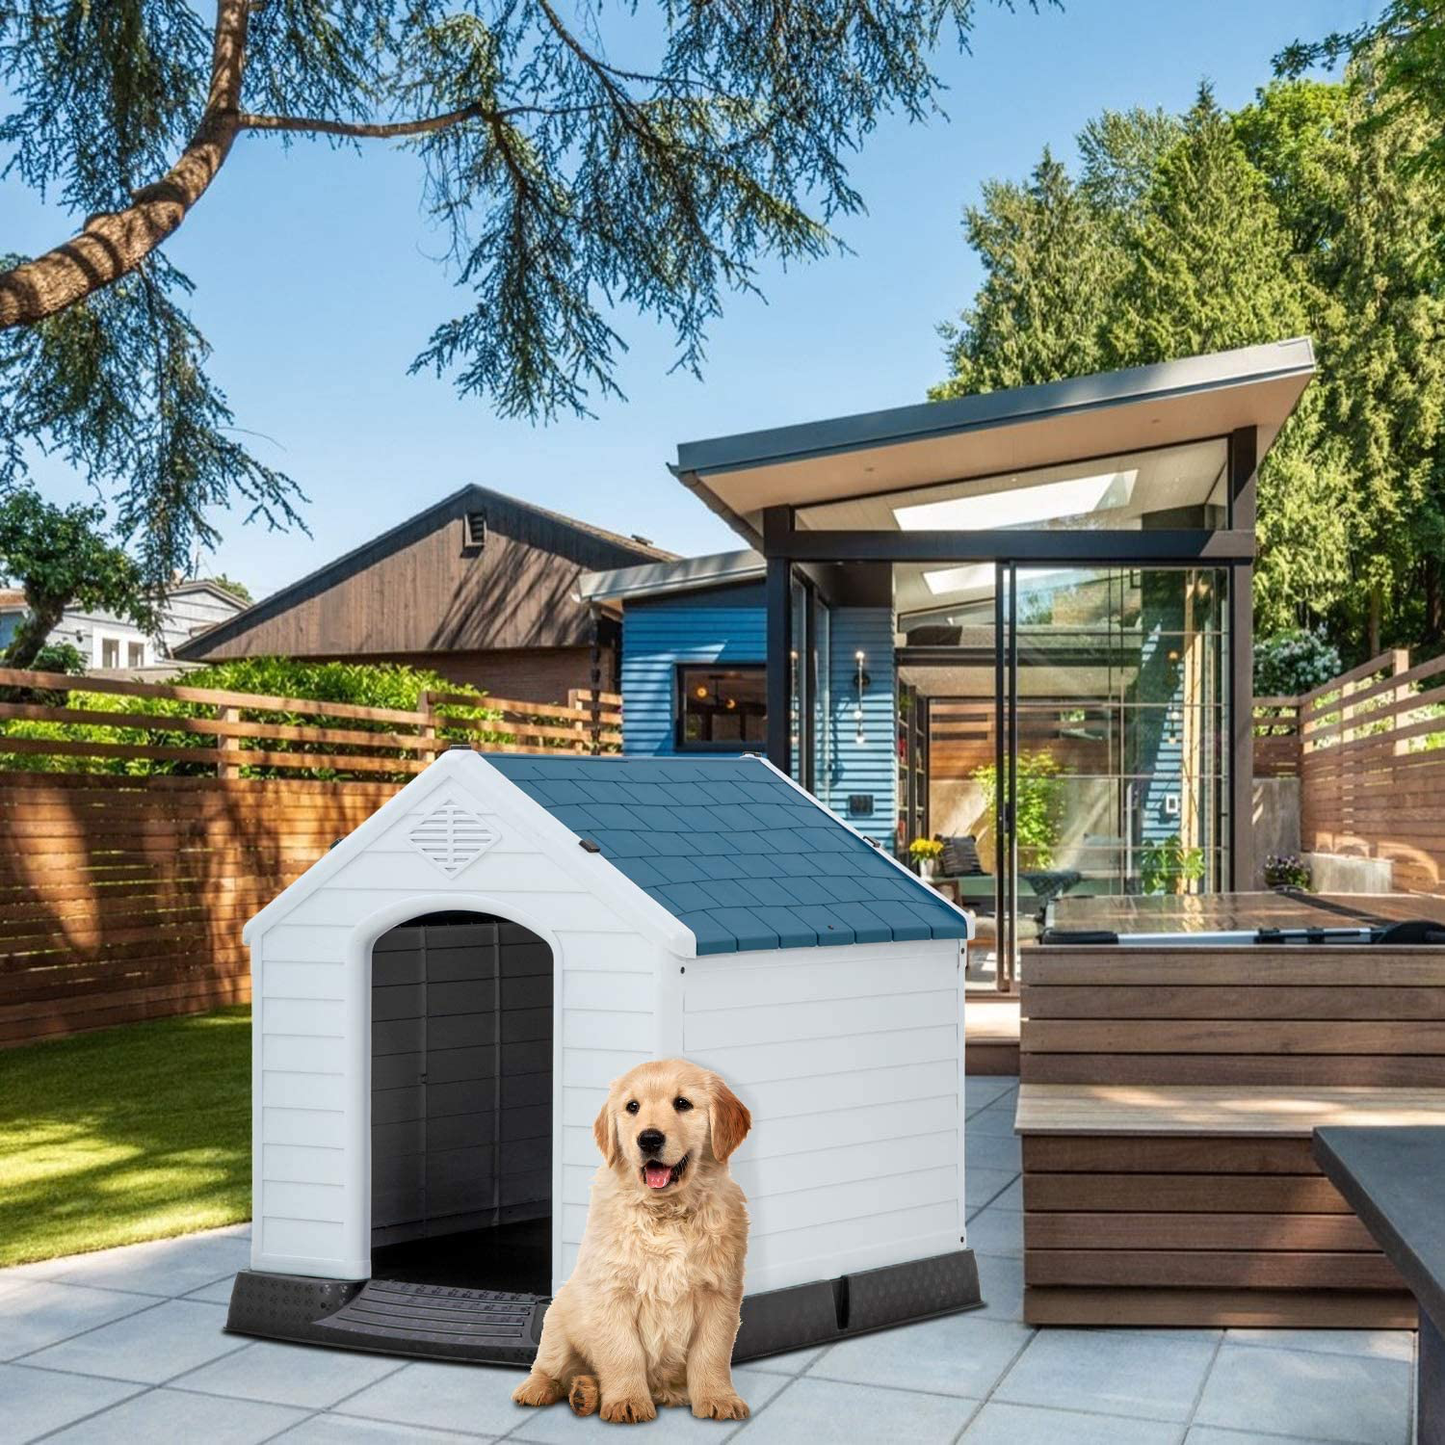 Dog House Doghouse House for Large Dog Large Dog House Dog Houses for Large Dogs Small Dog House Pet House Dog House Outdoor All Weather Dog House, with Base Support for Winter Tough Durable House